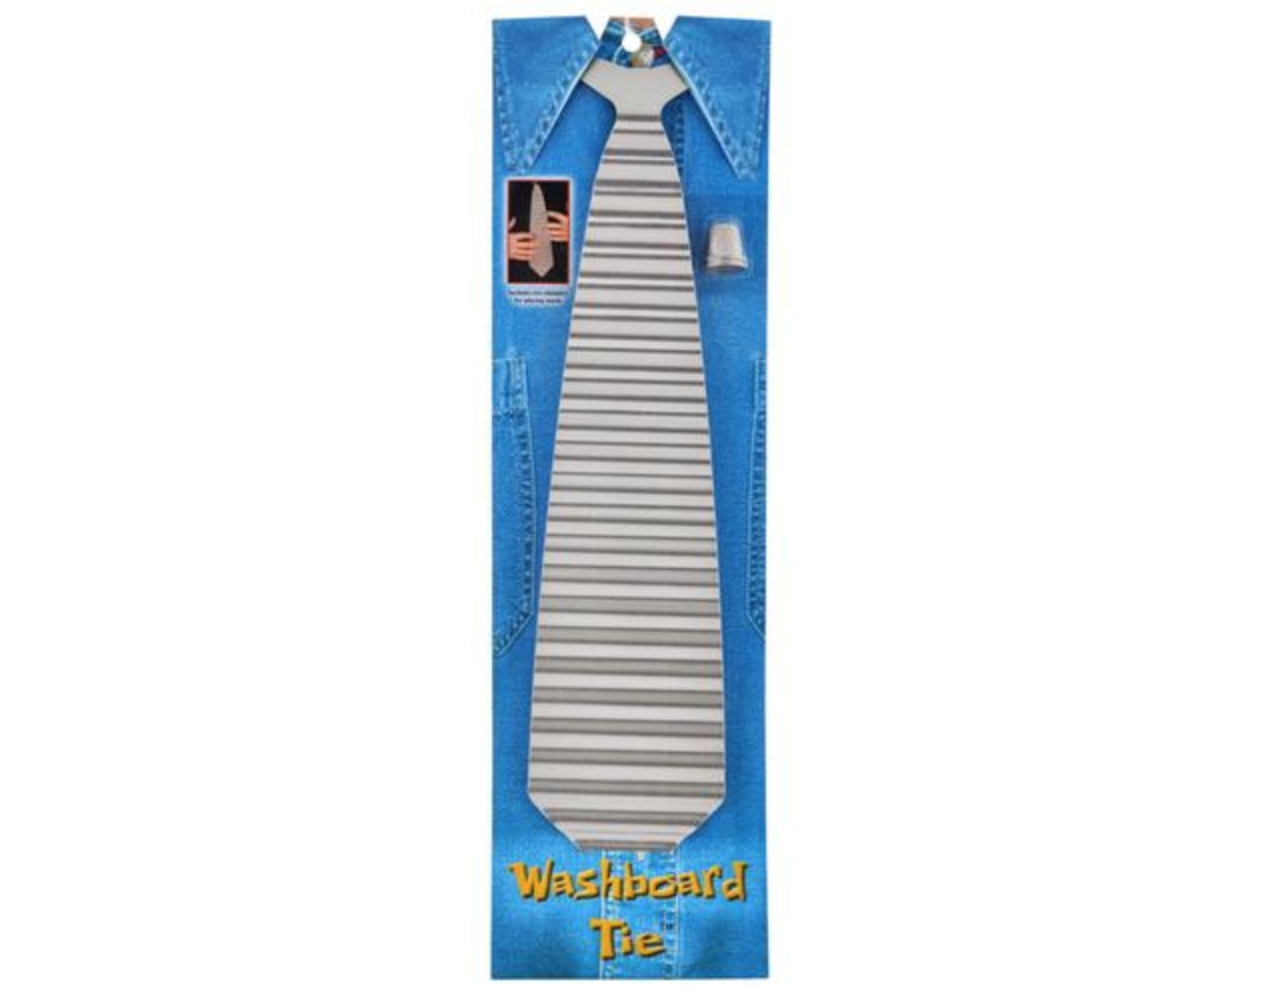 washboard tie holiday music gift